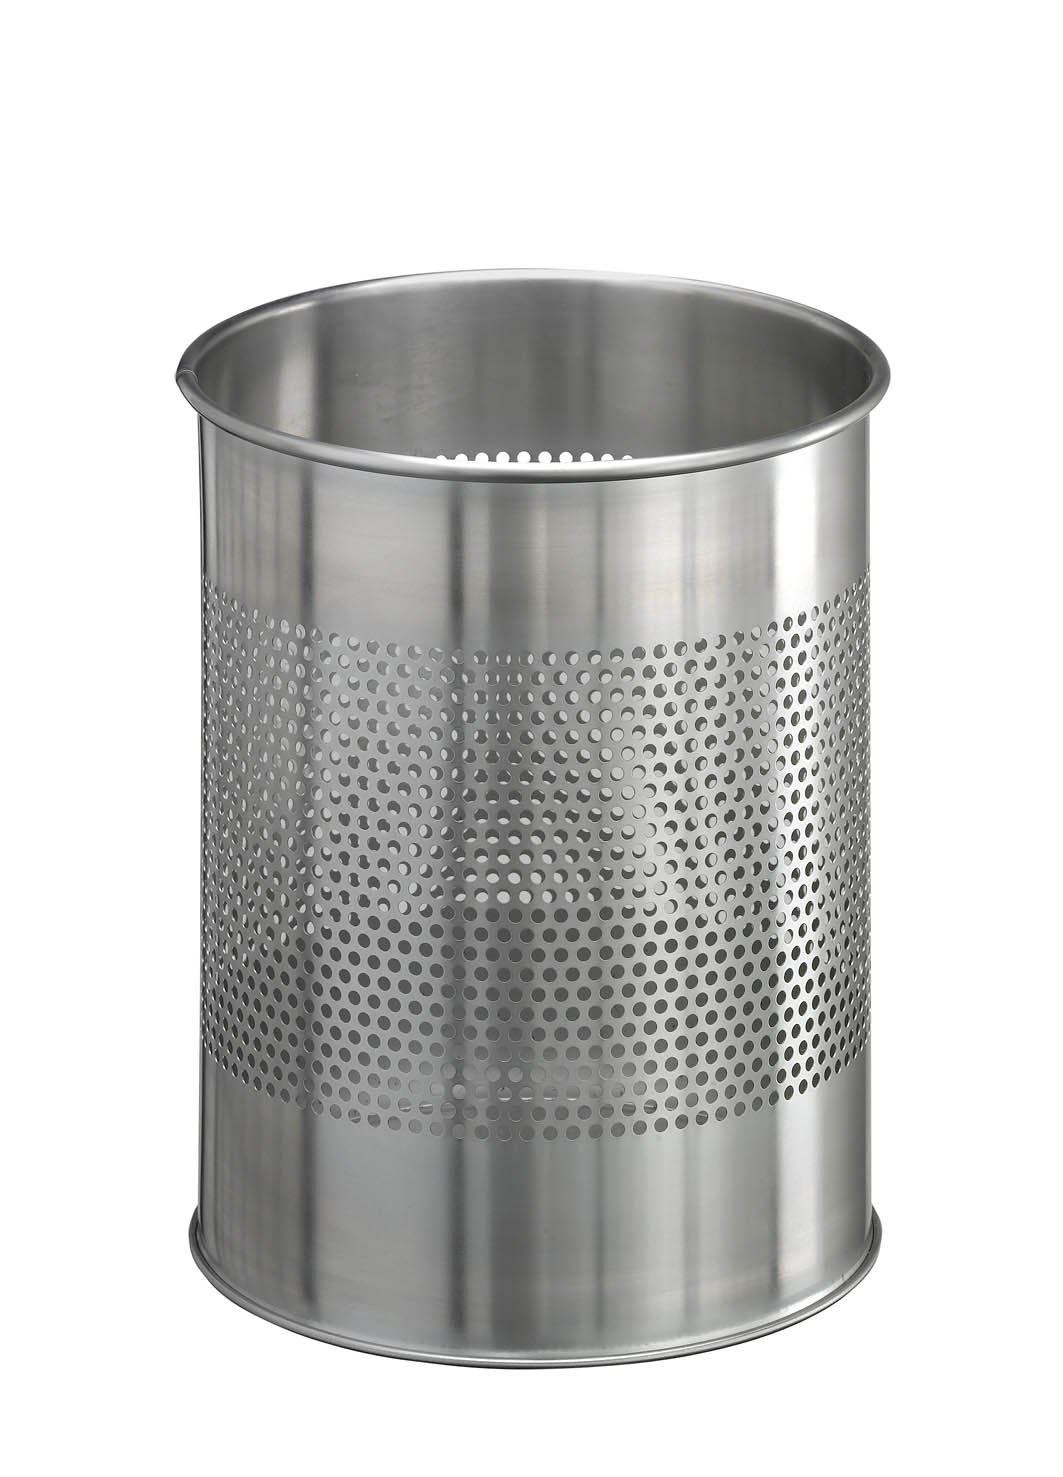 Classic Round Stainless Steel Waste Paper Basket 15L with 165mm Decorative Perforation in the middle-Silver-Distinct Designs (London) Ltd